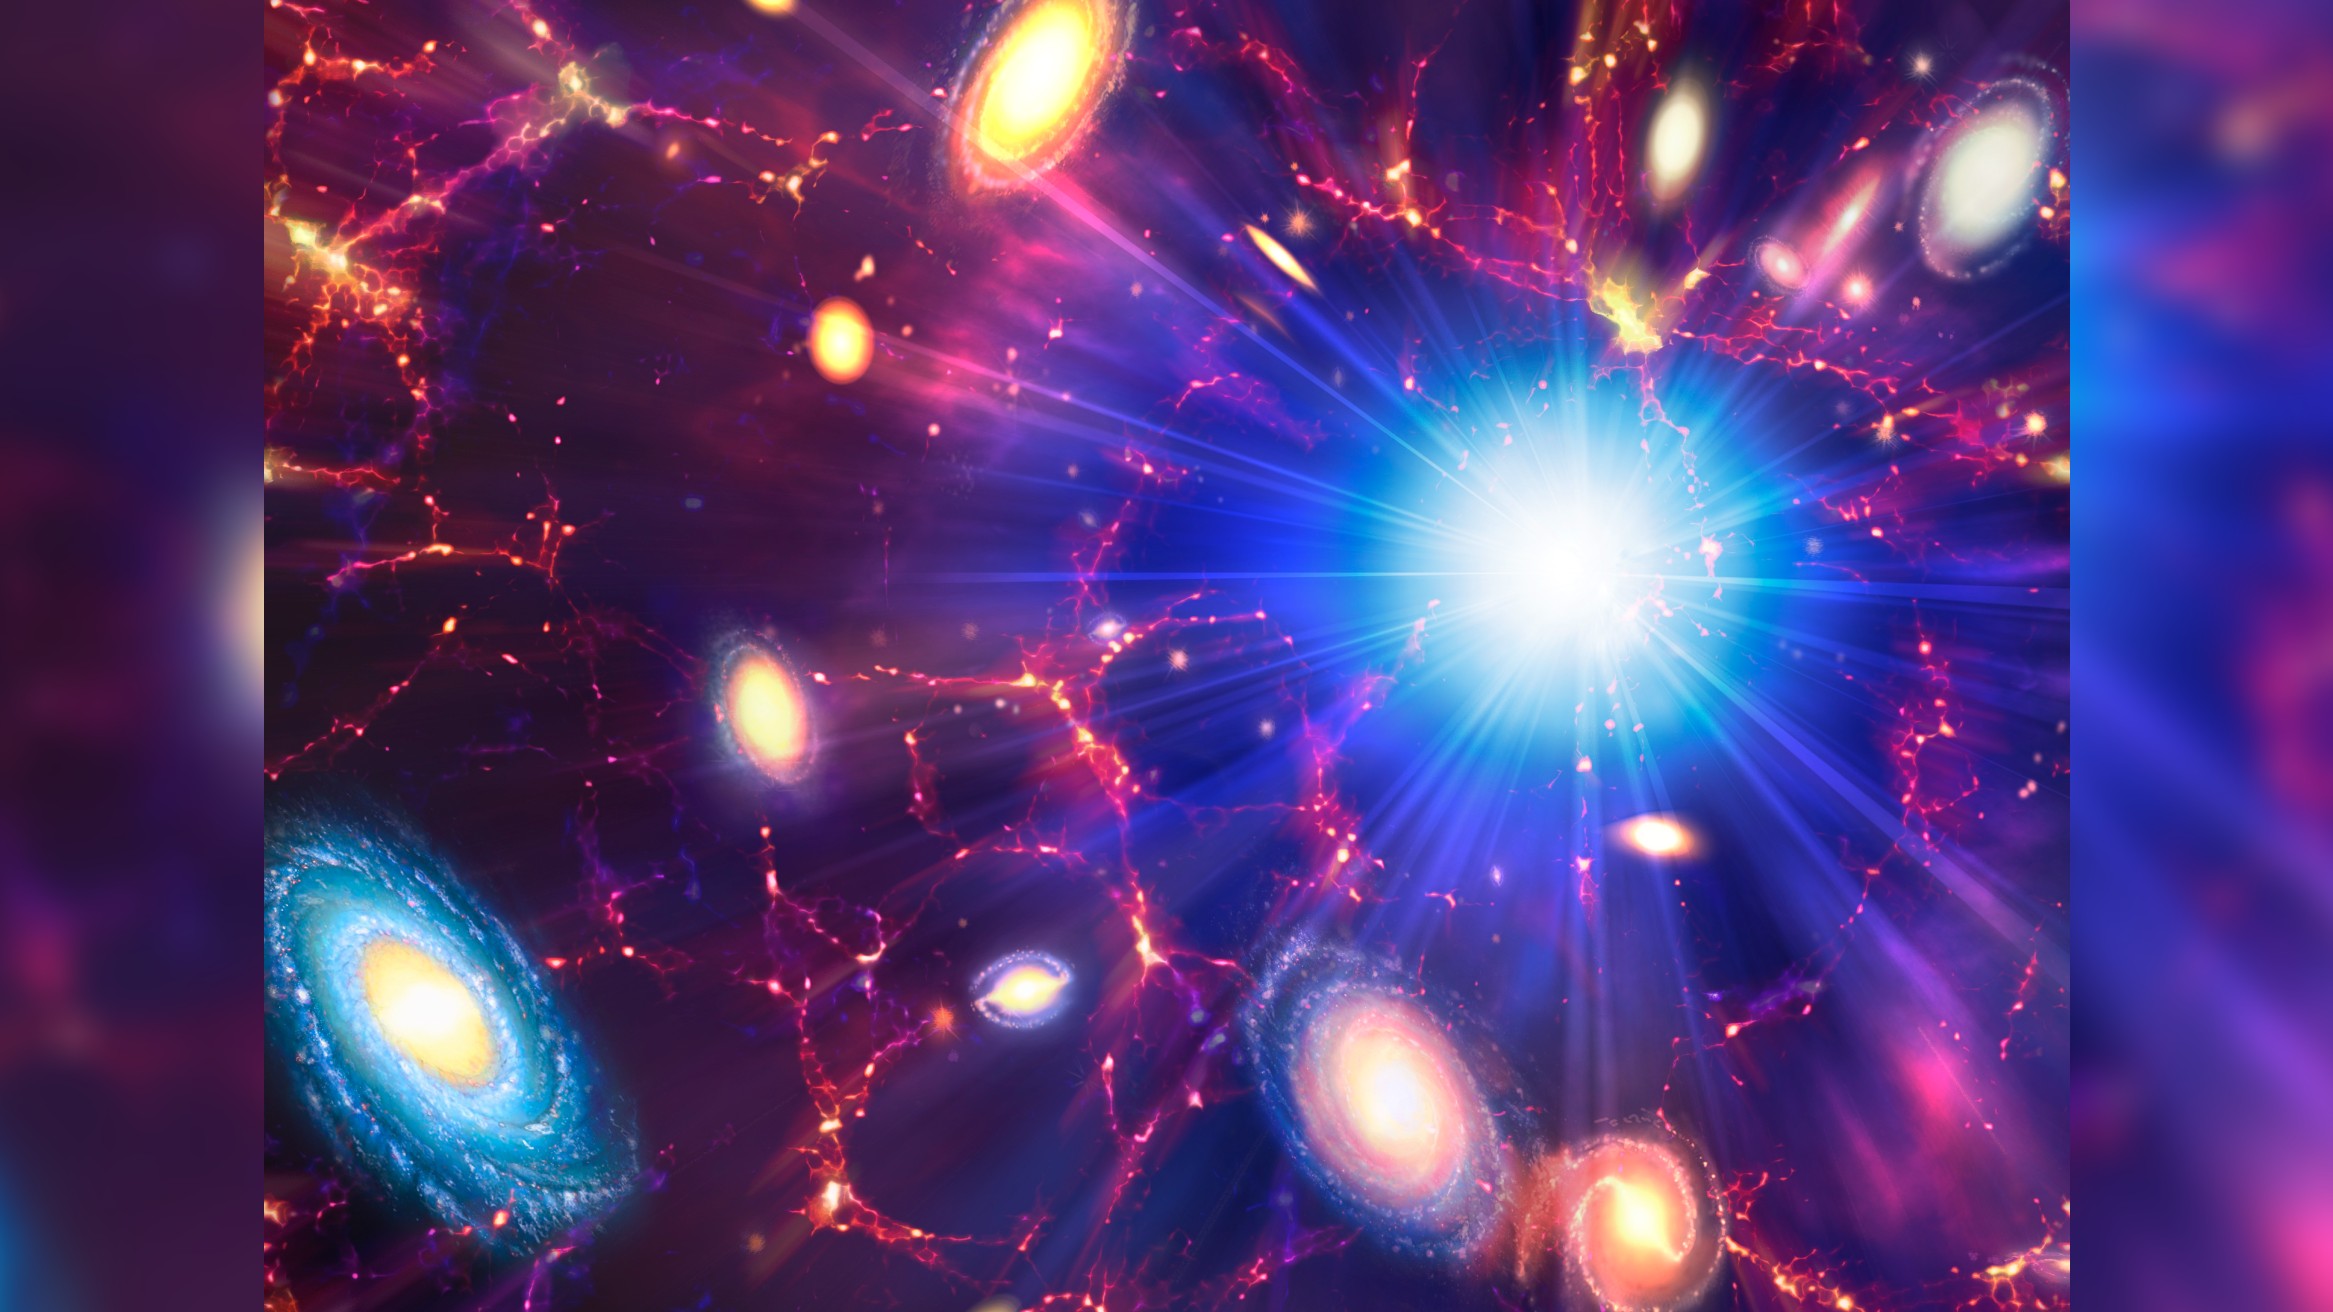 An illustration of the Big Bang theory showing galaxies exploding outward